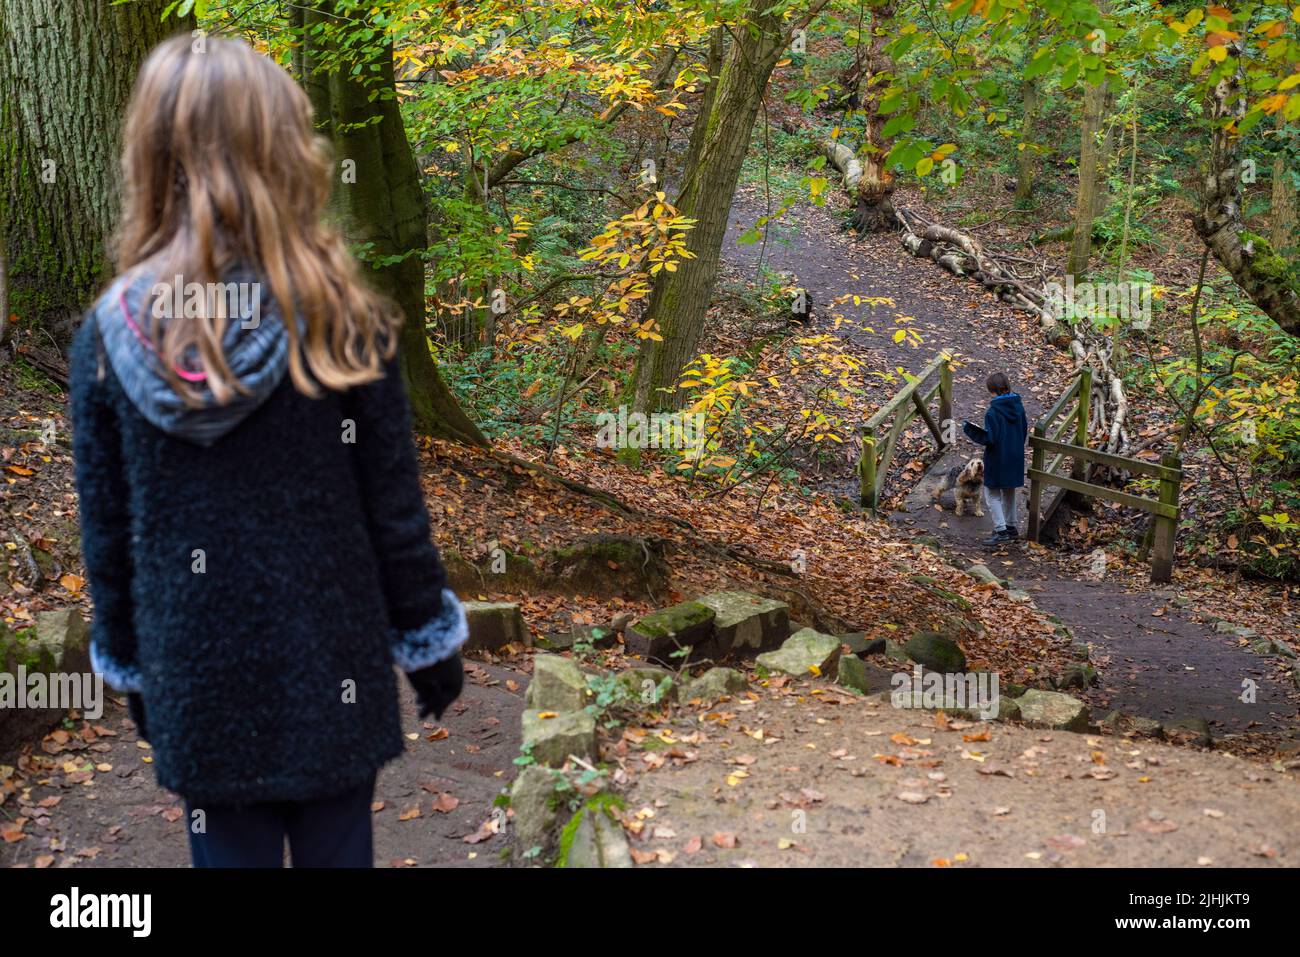 Sheffield, UK - 31 Oct 2019: a girl looks down steep steps in the woods to her brother at a gate below, Autumn woodland at Eccleshall Woods Stock Photo